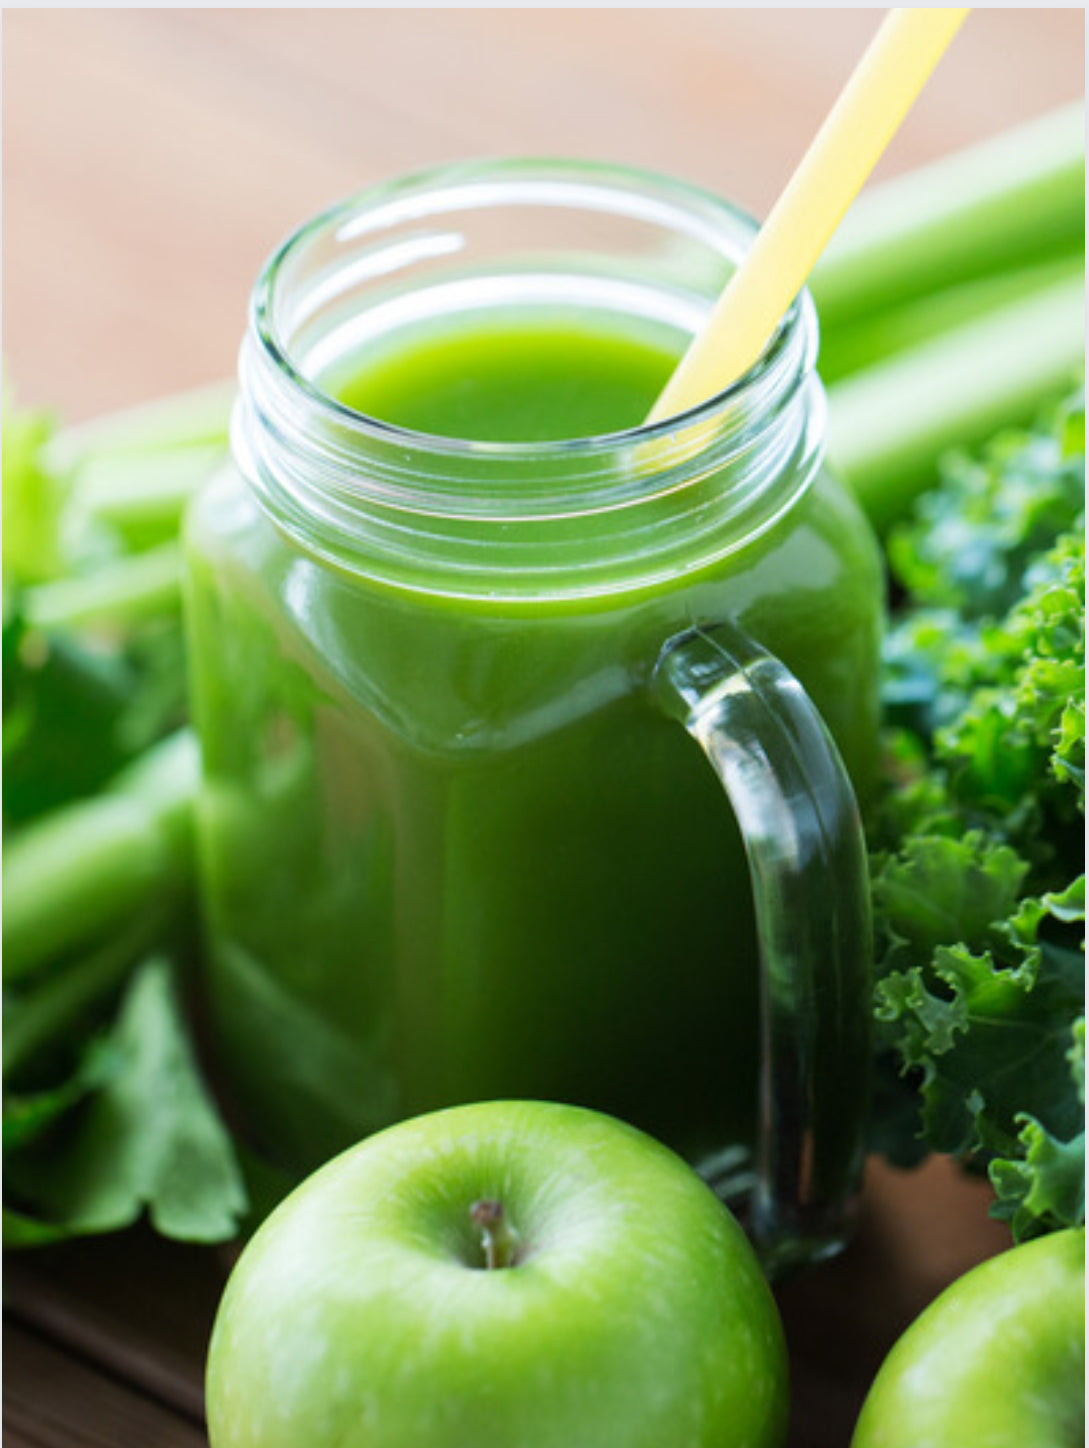 GREEN JUICES